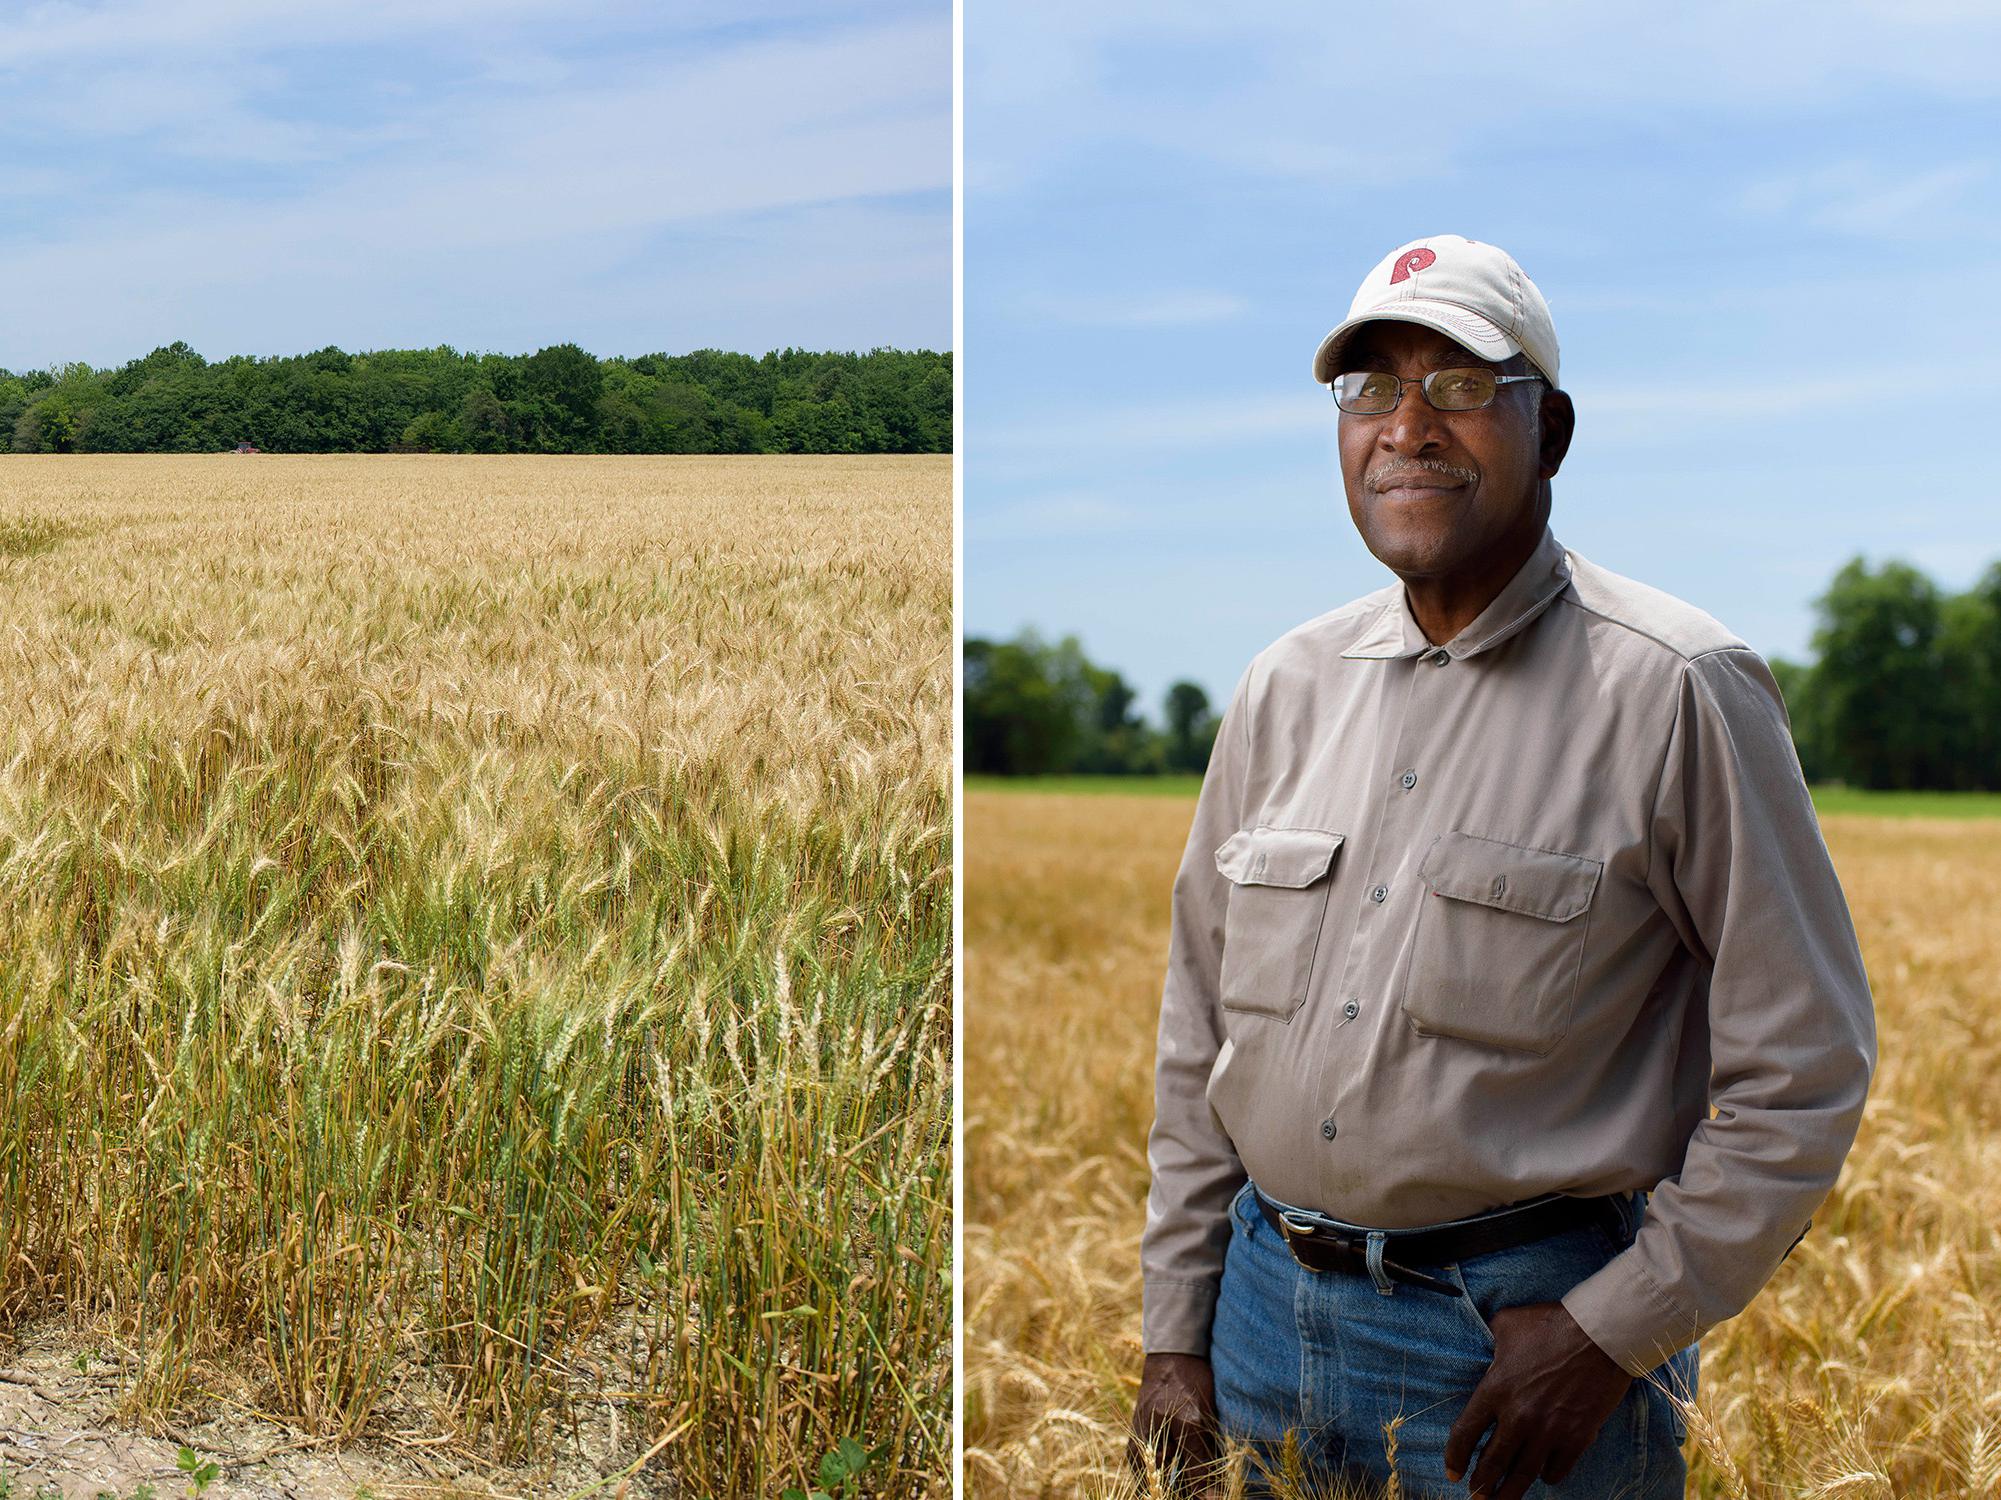 Mississippi’s growers harvested about 80,000 acres of wheat and averaged 58 bushels per acre in 2016. These amber waves of grain (left) are in a Coahoma County, Mississippi, field on May 23, 2016. David Wade (right) knows his Coahoma County, Mississippi, wheat would have produced better yields if persistent spring rains had not stunted the crop’s development. He is standing in his wheat field on May 23, 2016, shortly before harvest. (Photos by MSU Extension Service/Kevin Hudson)